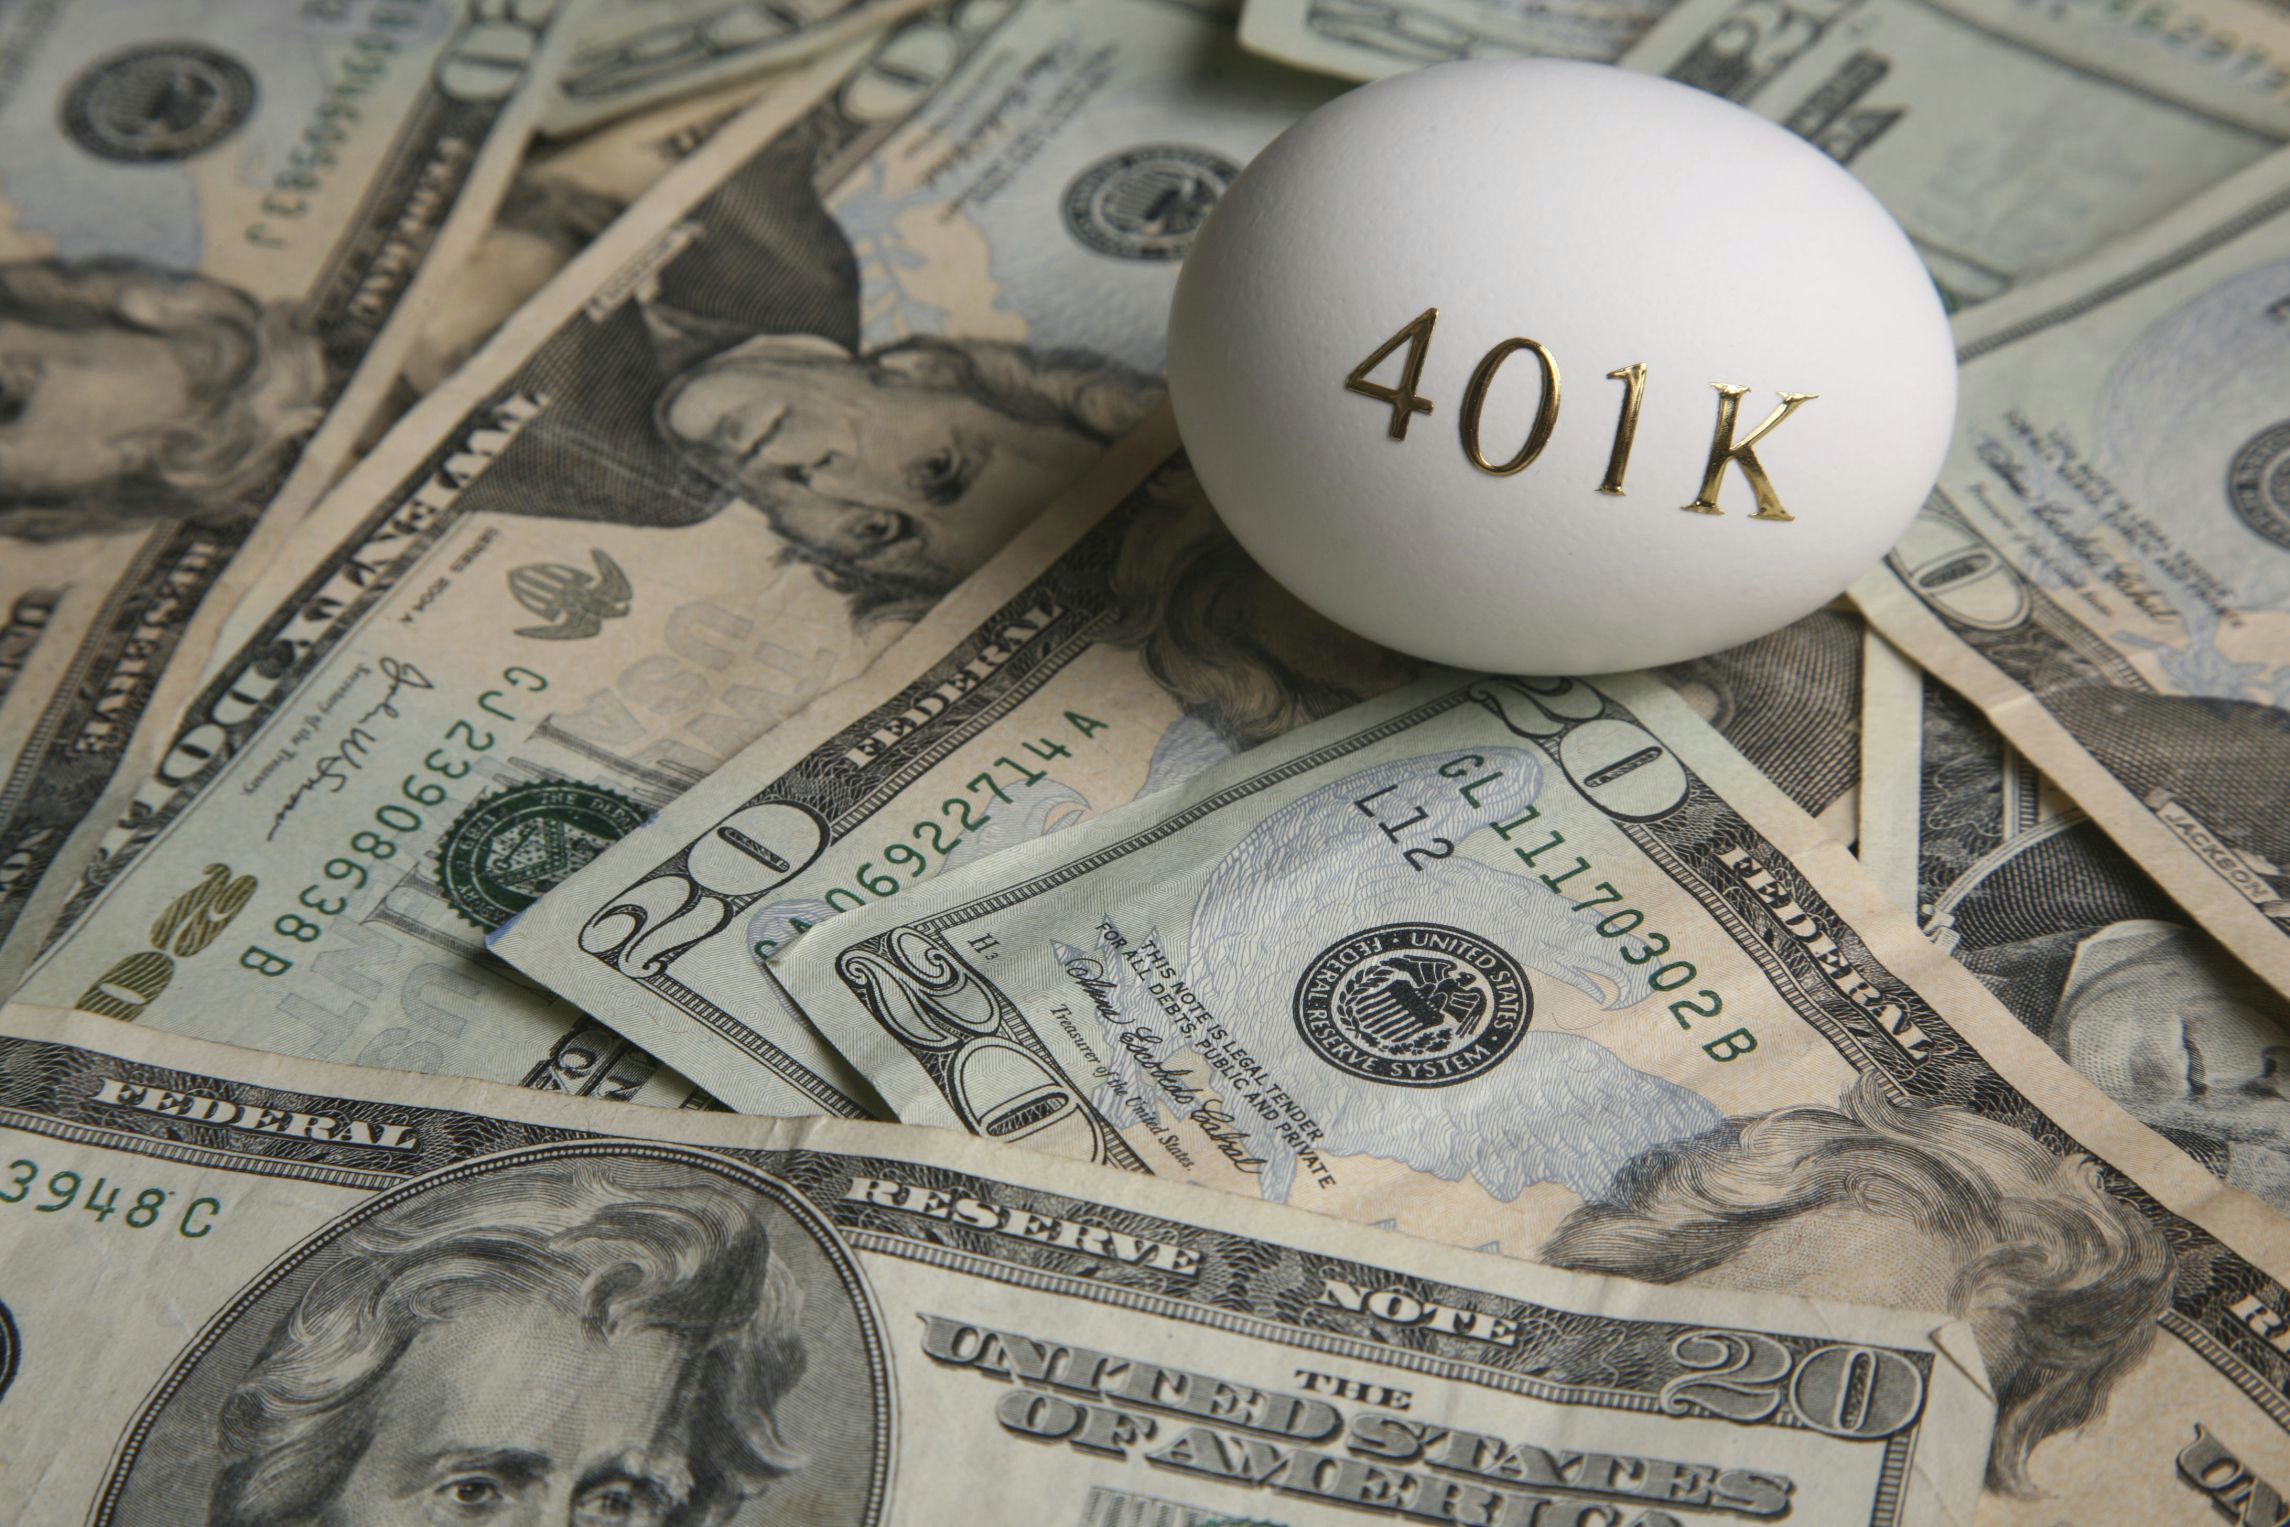 Drawing 401k at Age 70 What to Know About Your 401 K Plan by Age 55